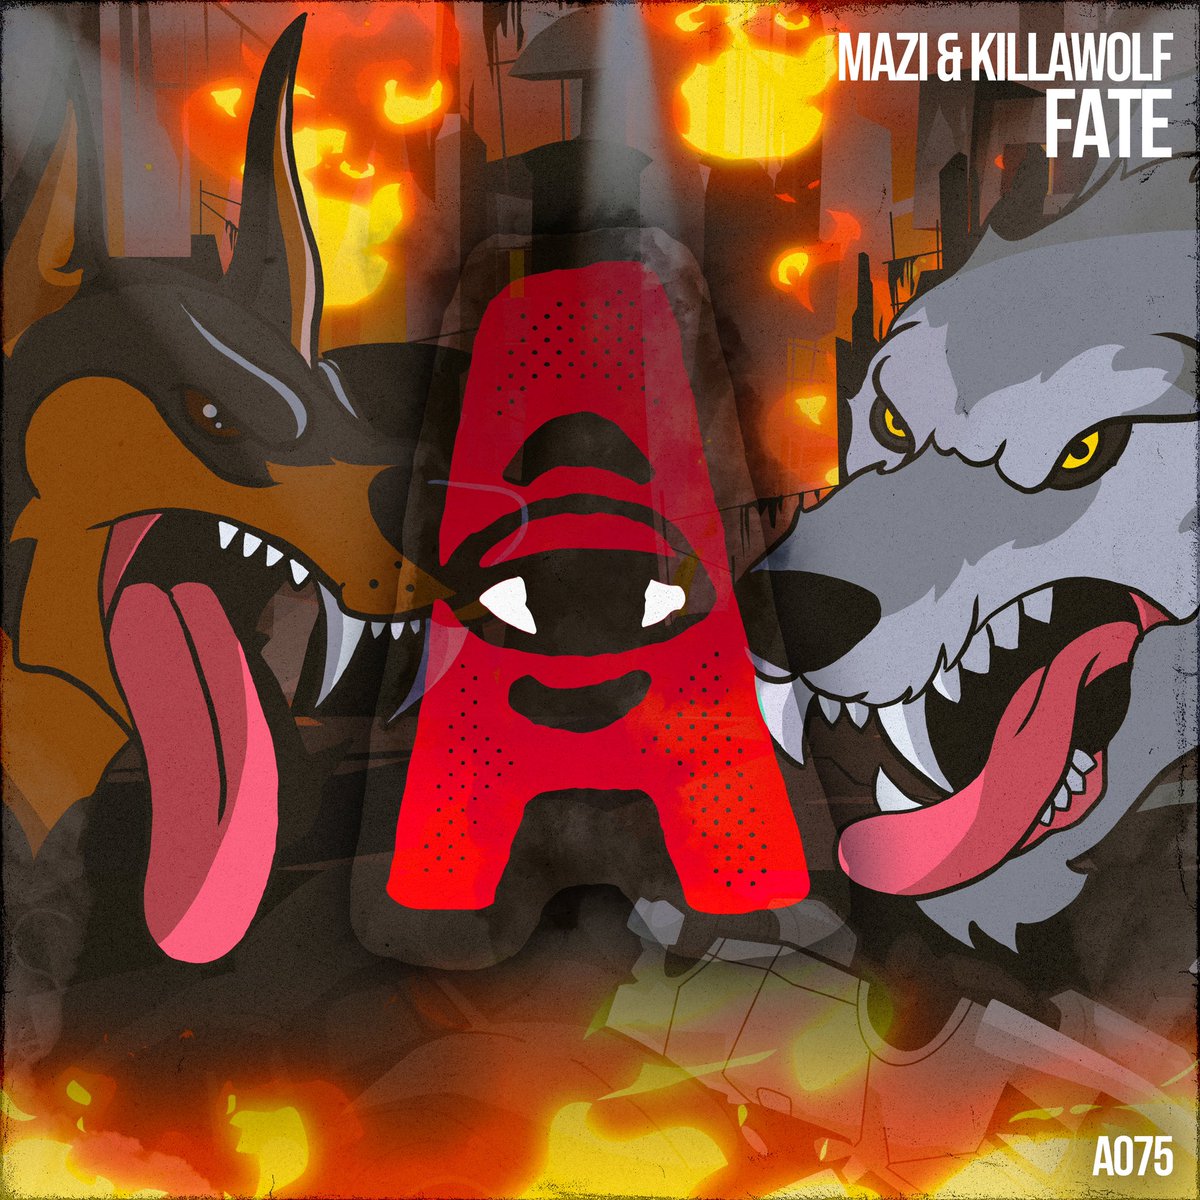 FATE w/ @MAZIdubz A RECORDS 04.26 MUCH LOVE TO @JessicaAudifred & the A RECORDS TEAM 🖤🐺